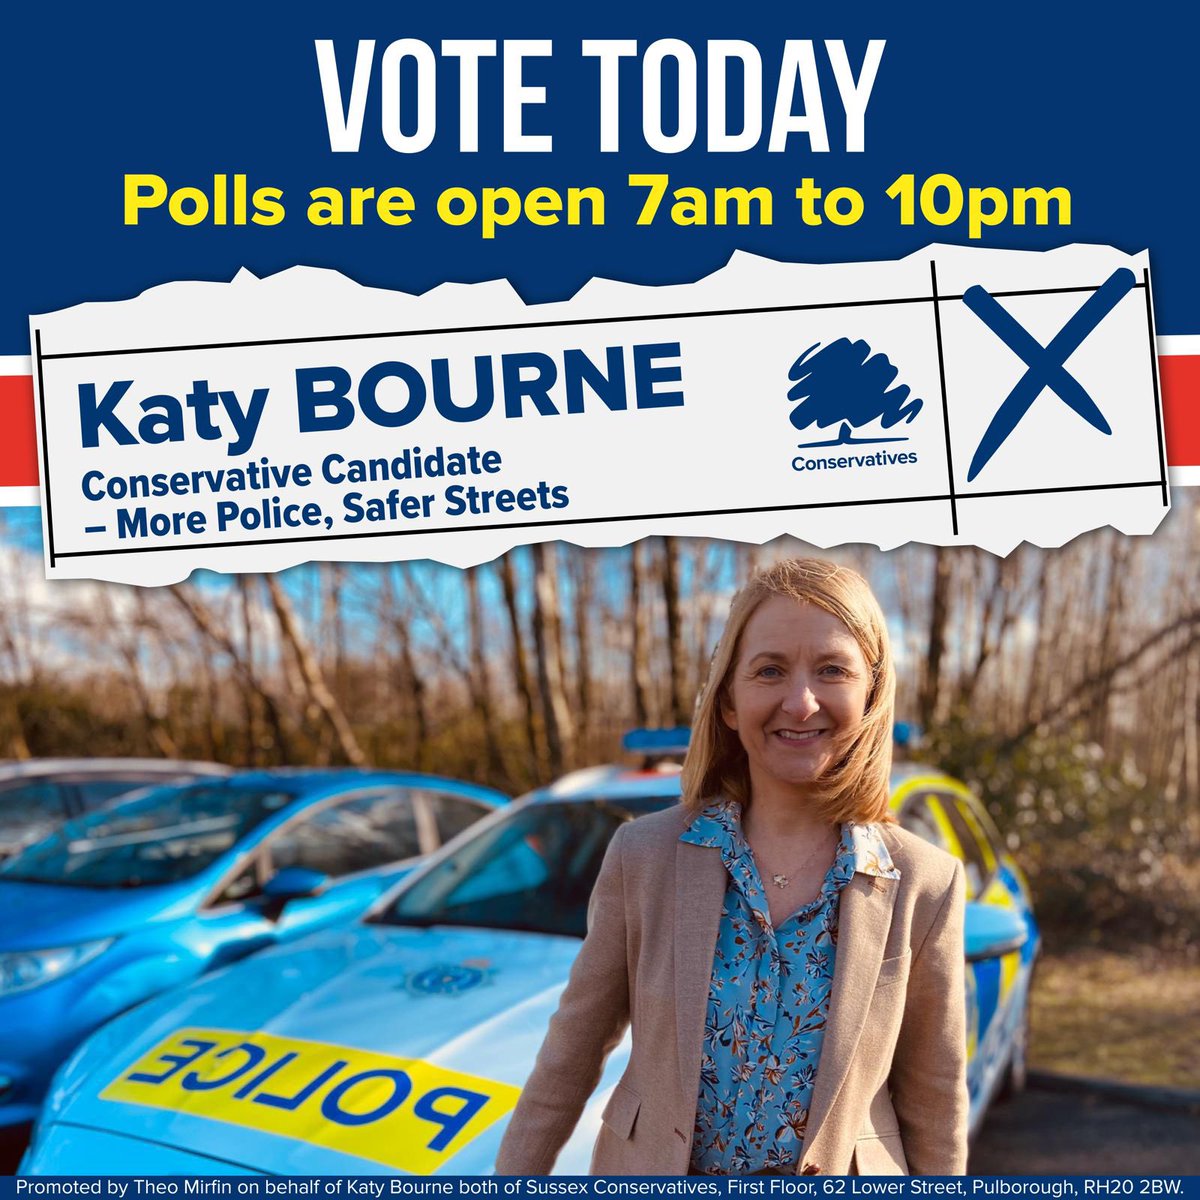 🗳️ Today, vote for Katy Bourne for Sussex Police & Crime Commissioner - More Police, Safer Streets. Use your vote today for Katy Bourne so that together we can continue to make Sussex safer. Over recent years, she has: ✔️Delivered the highest number of police officers in over…